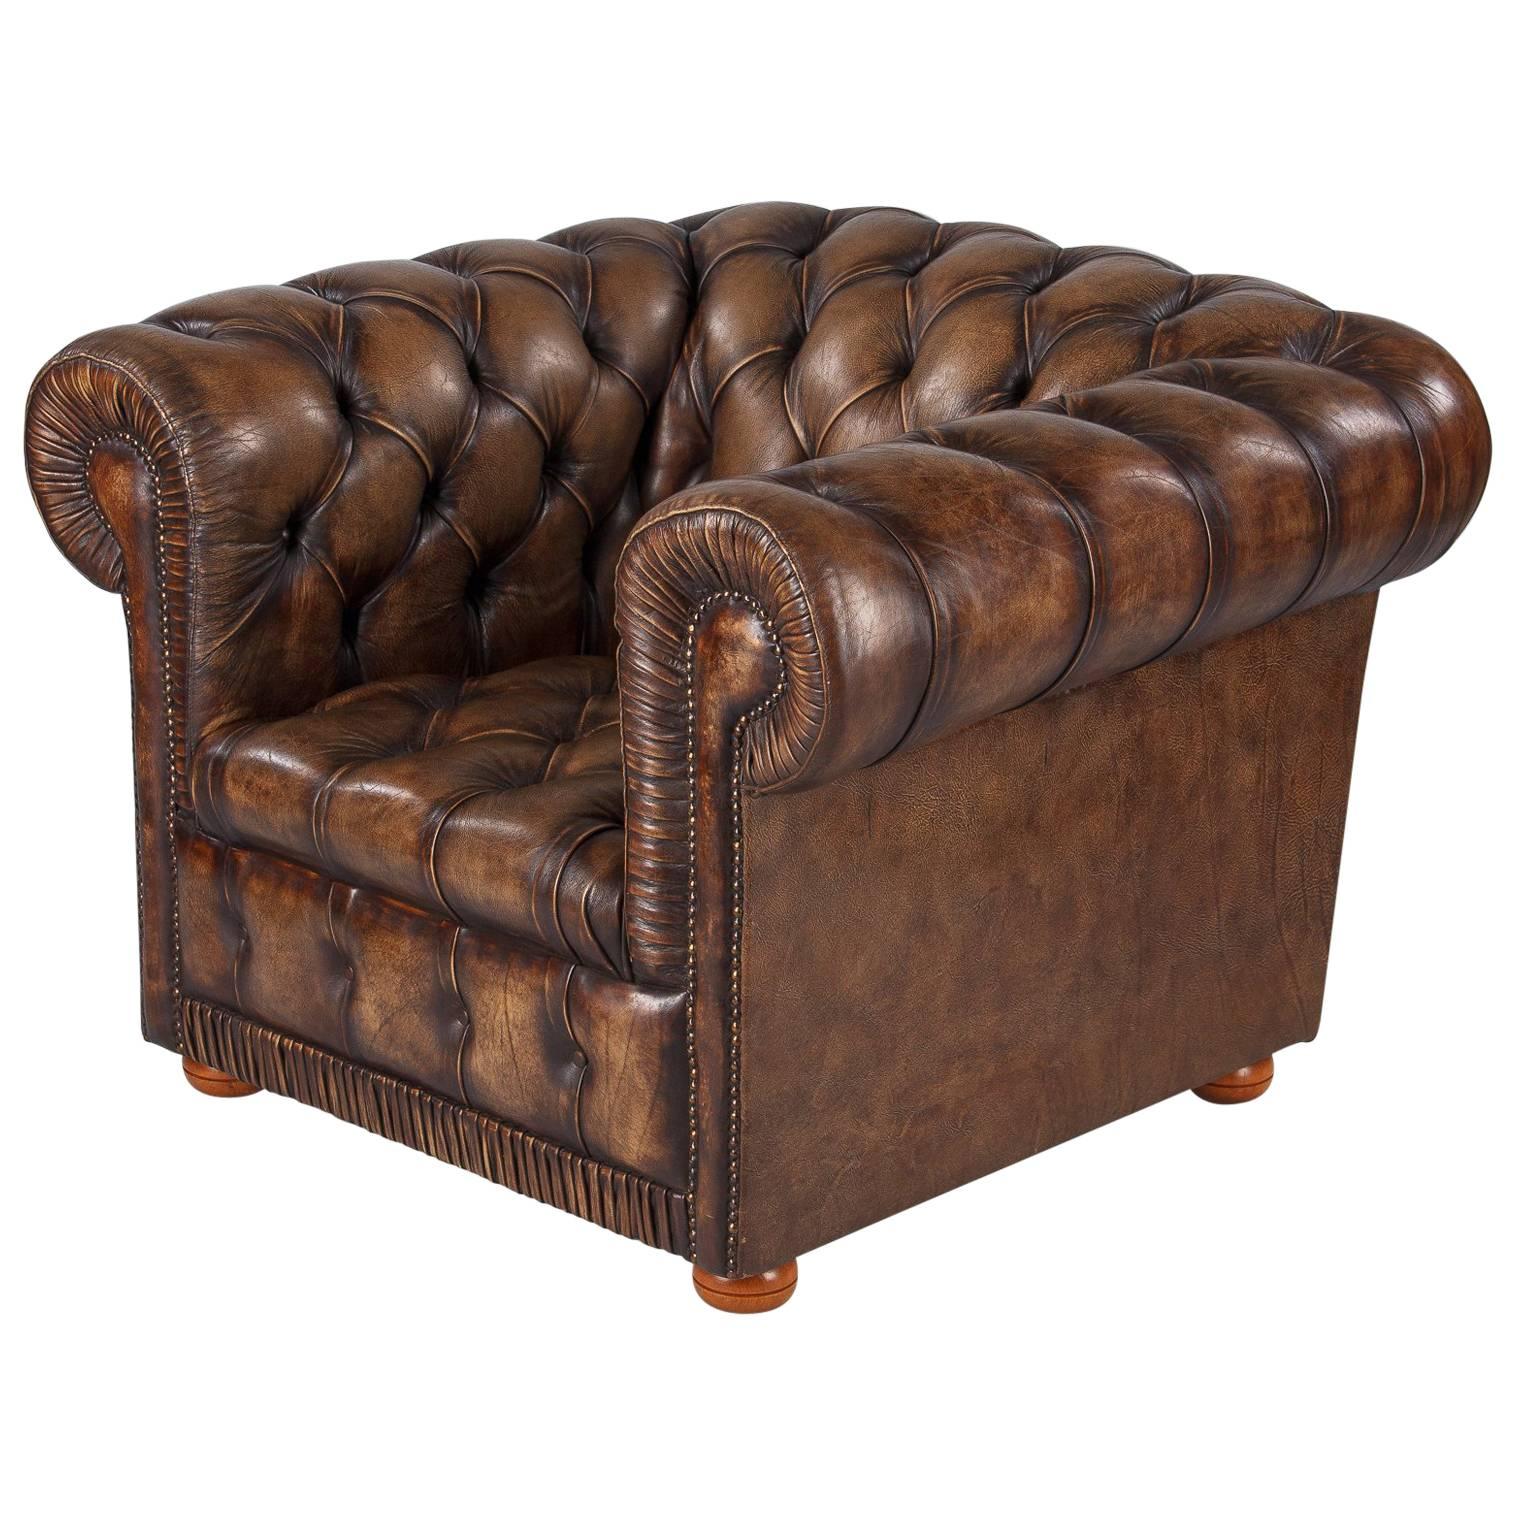 Vintage English Chesterfield Armchair in Brown Leather, 1960s